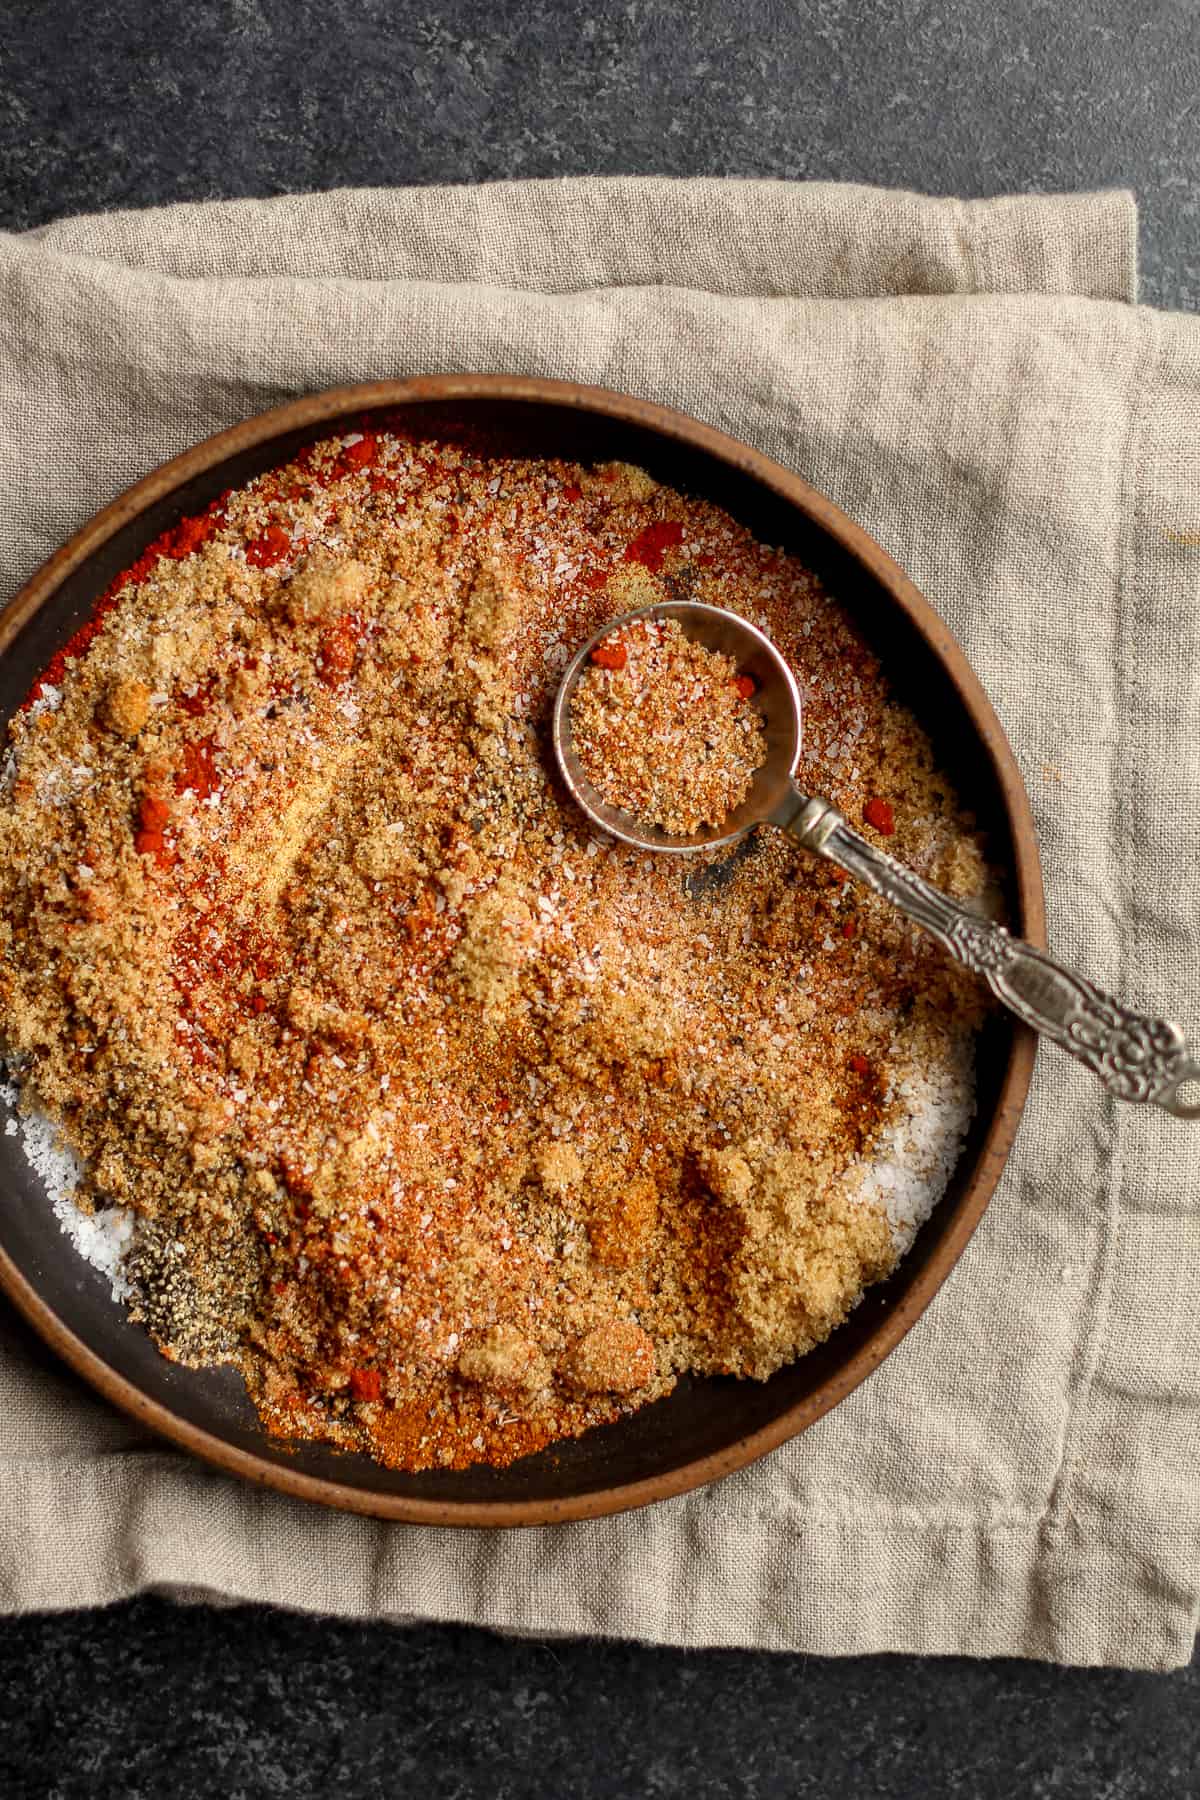 The bowl of dry rub partially mixed together, with a tablespoon.